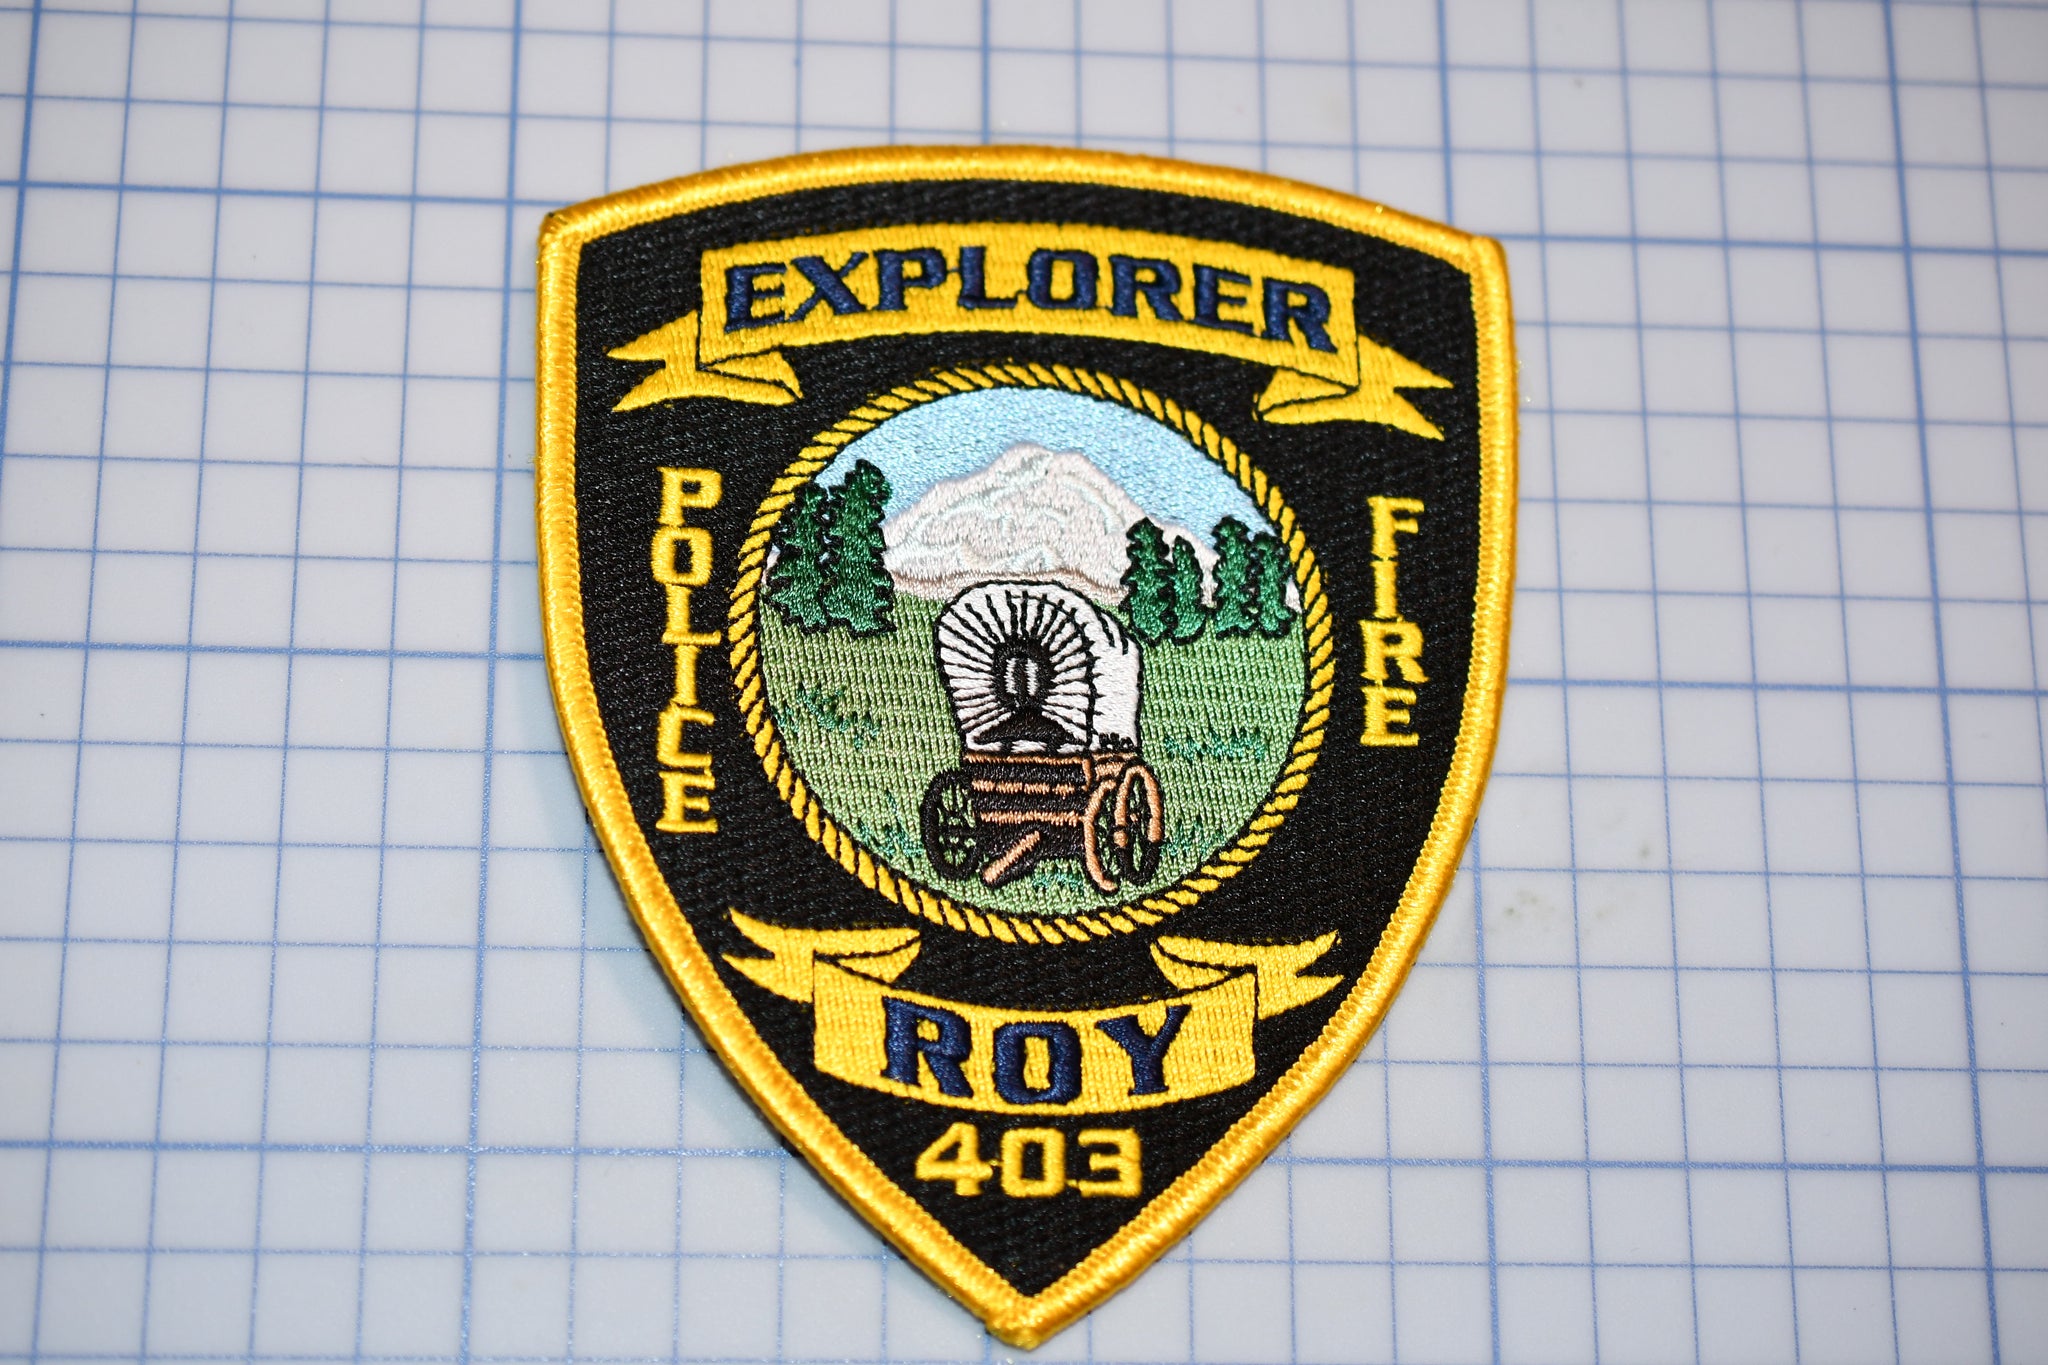 Roy Massachusetts Fire Police Explorers Patch (S5-2)